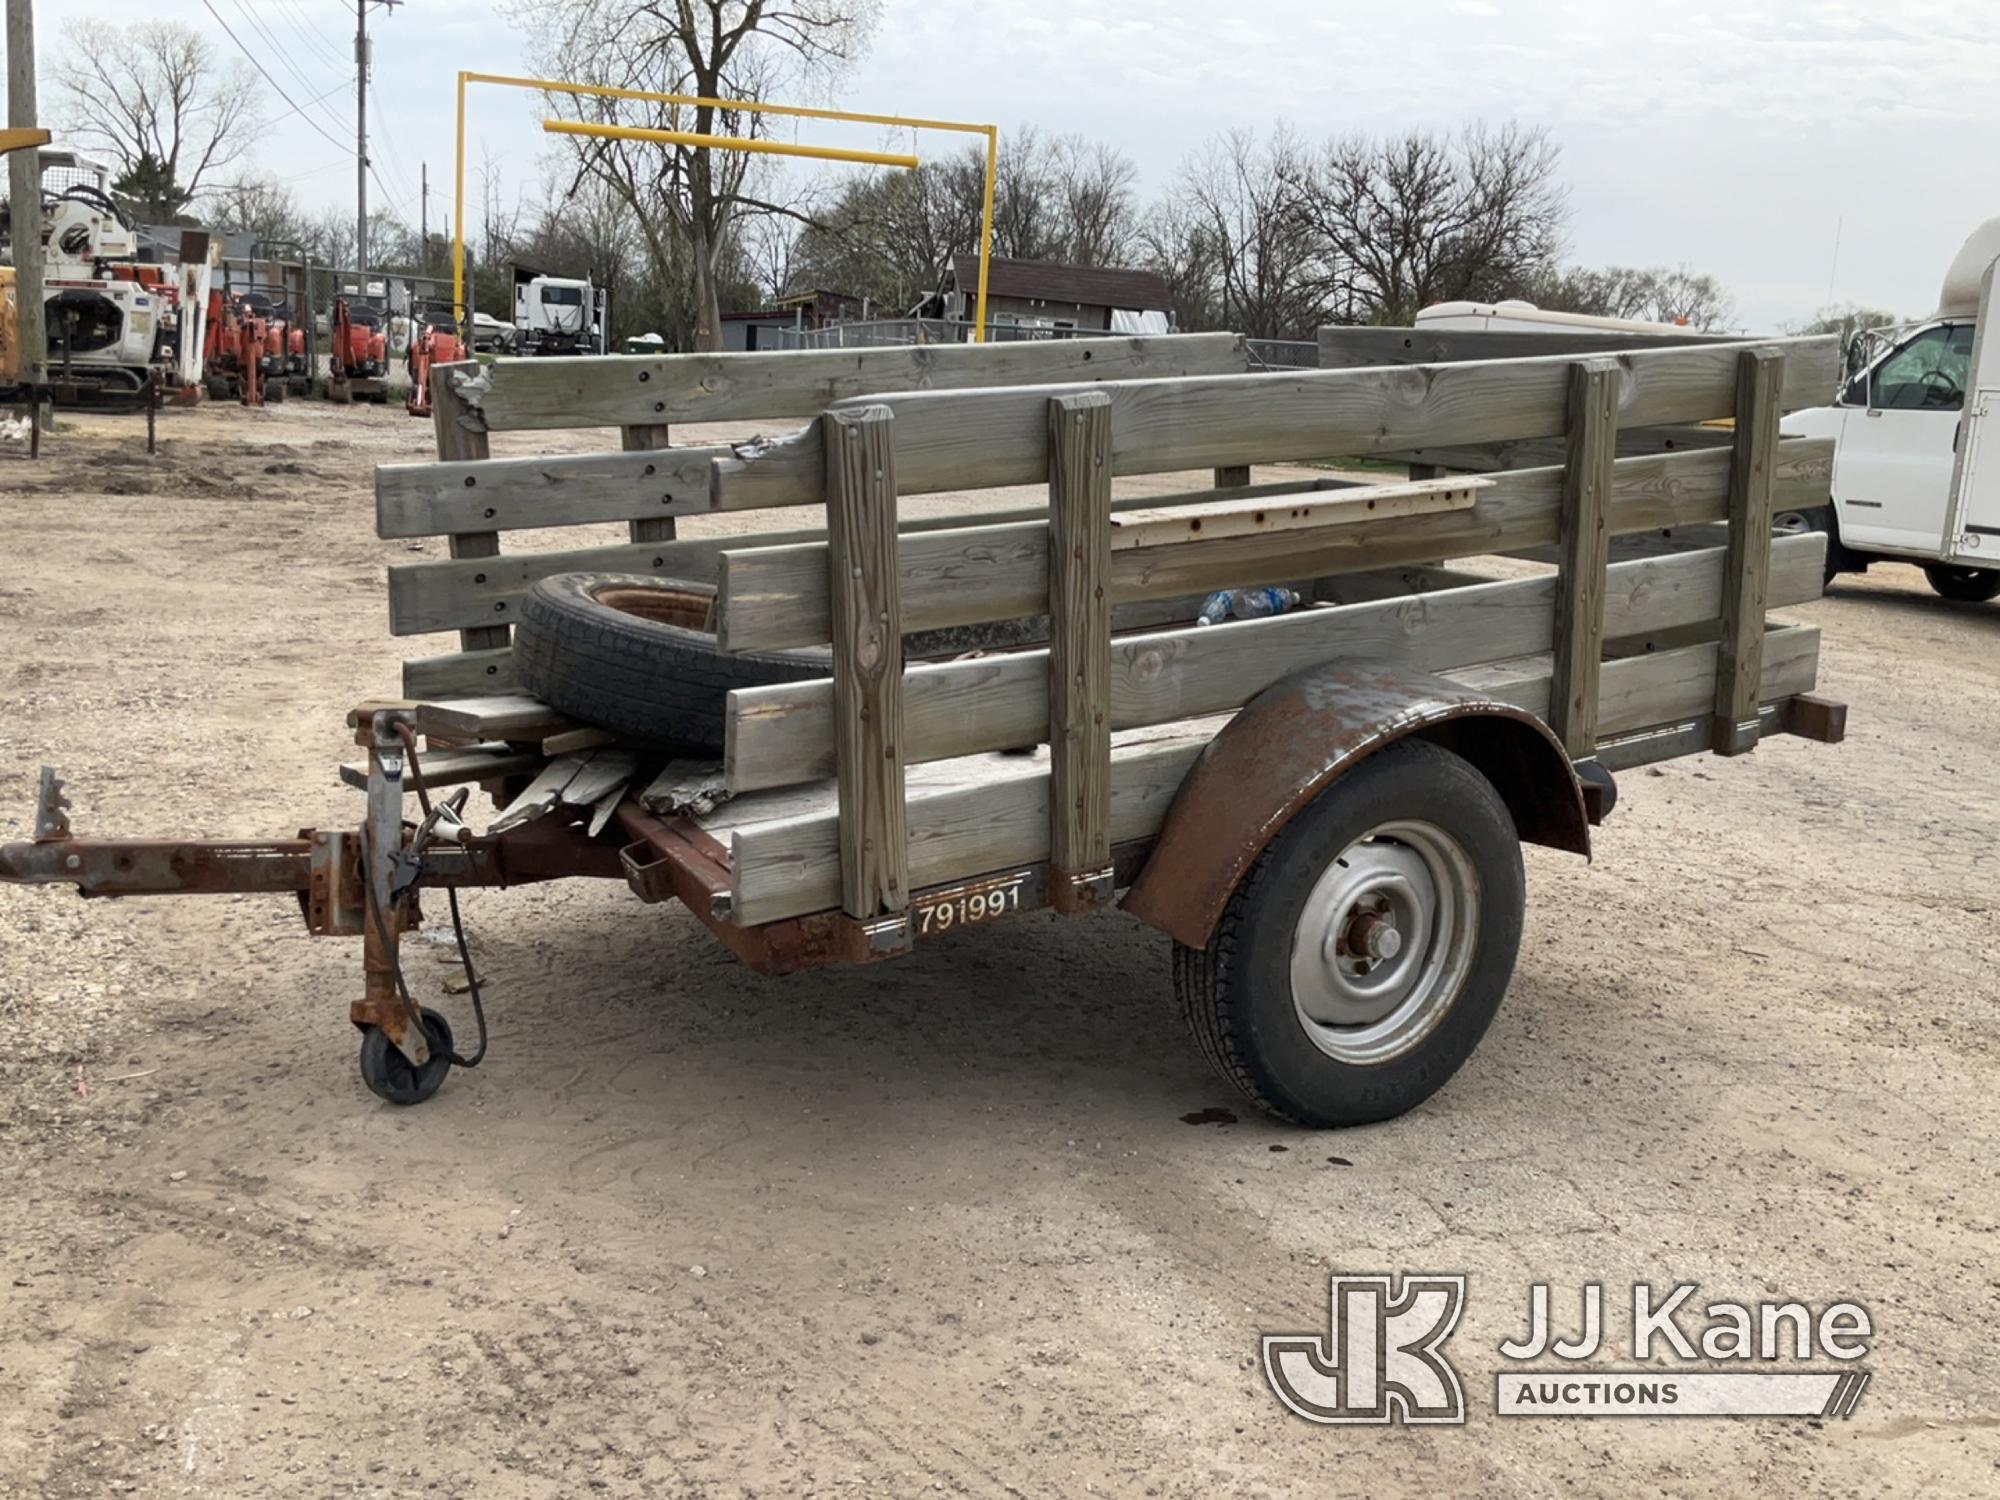 (South Beloit, IL) 1991 Homemade S/A Tagalong Utility Trailer No Title